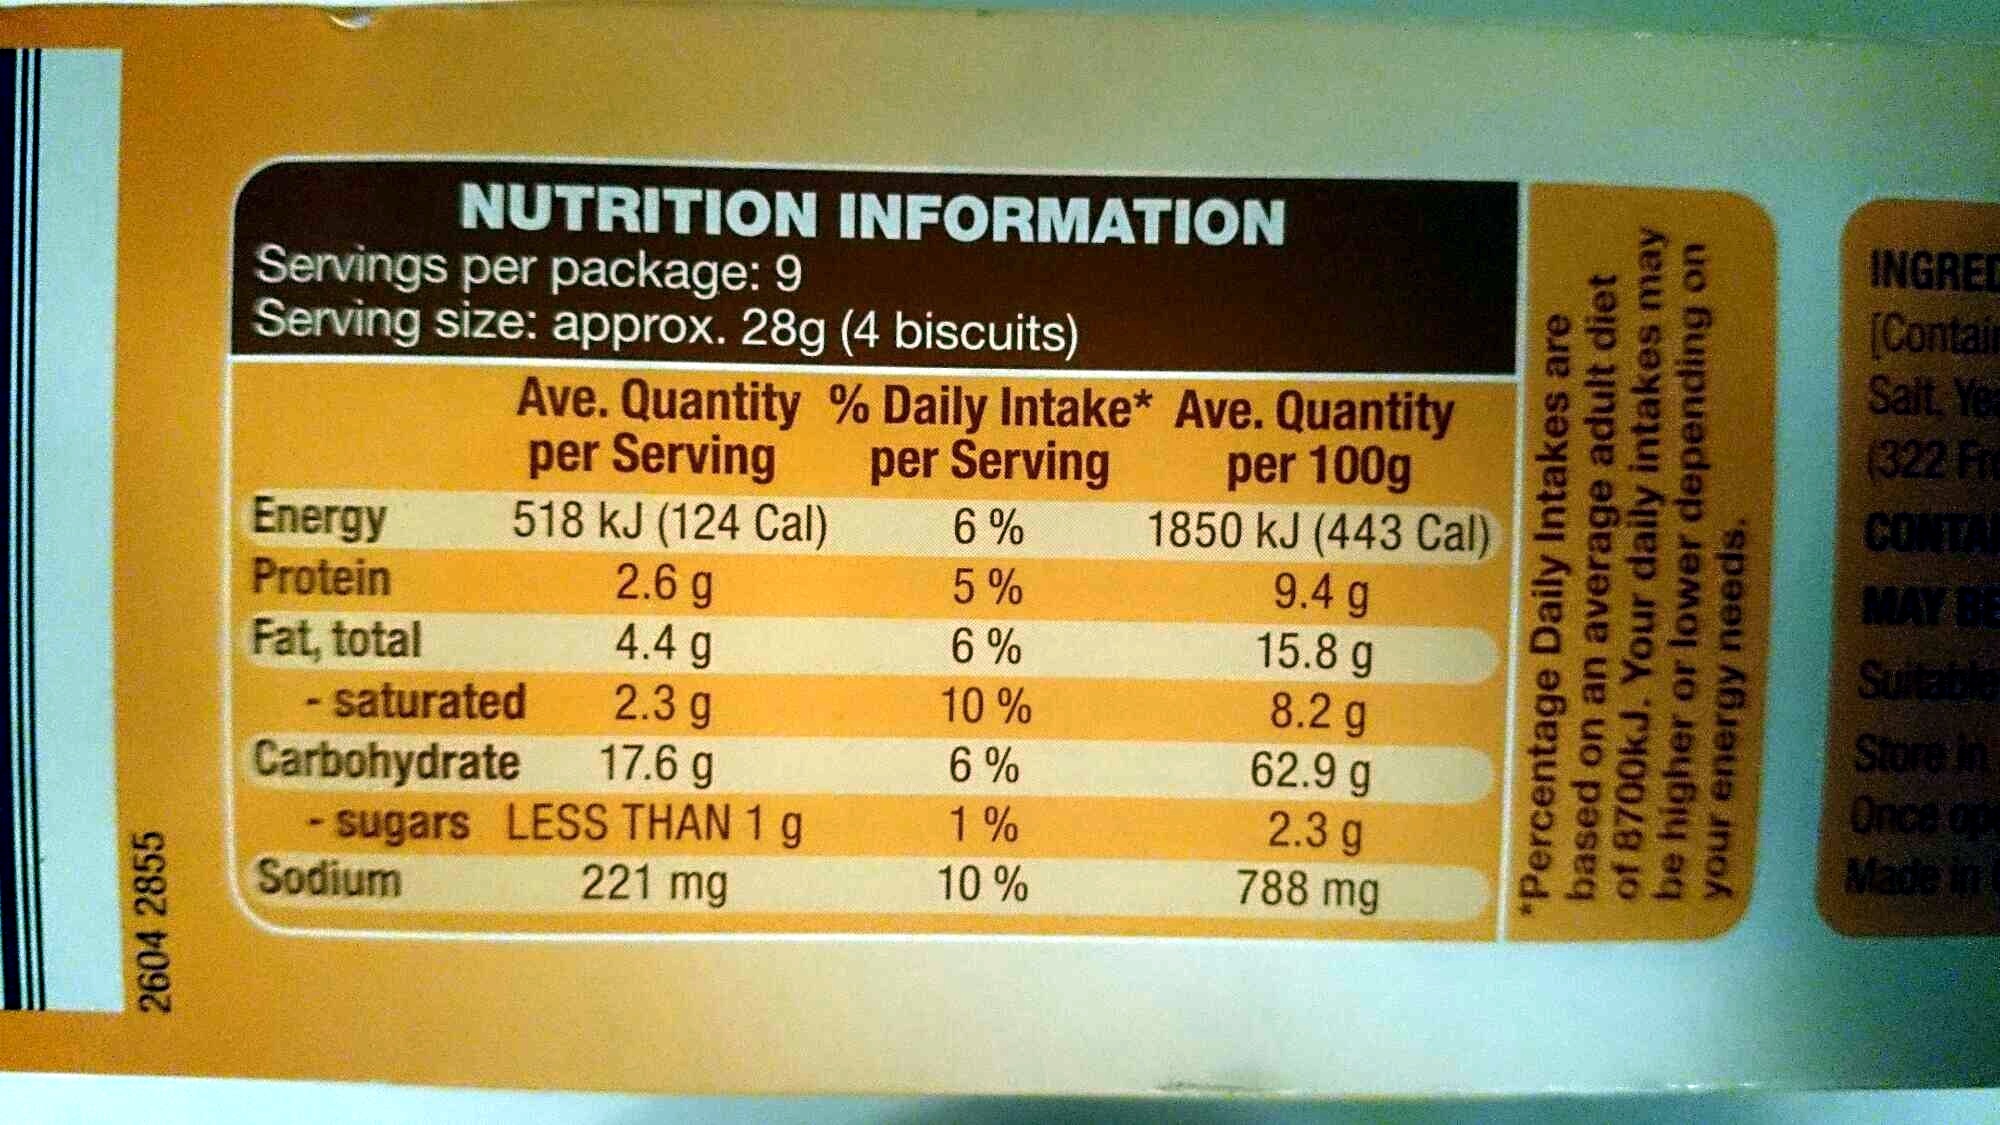 Biscottes Au froment - Nutrition facts